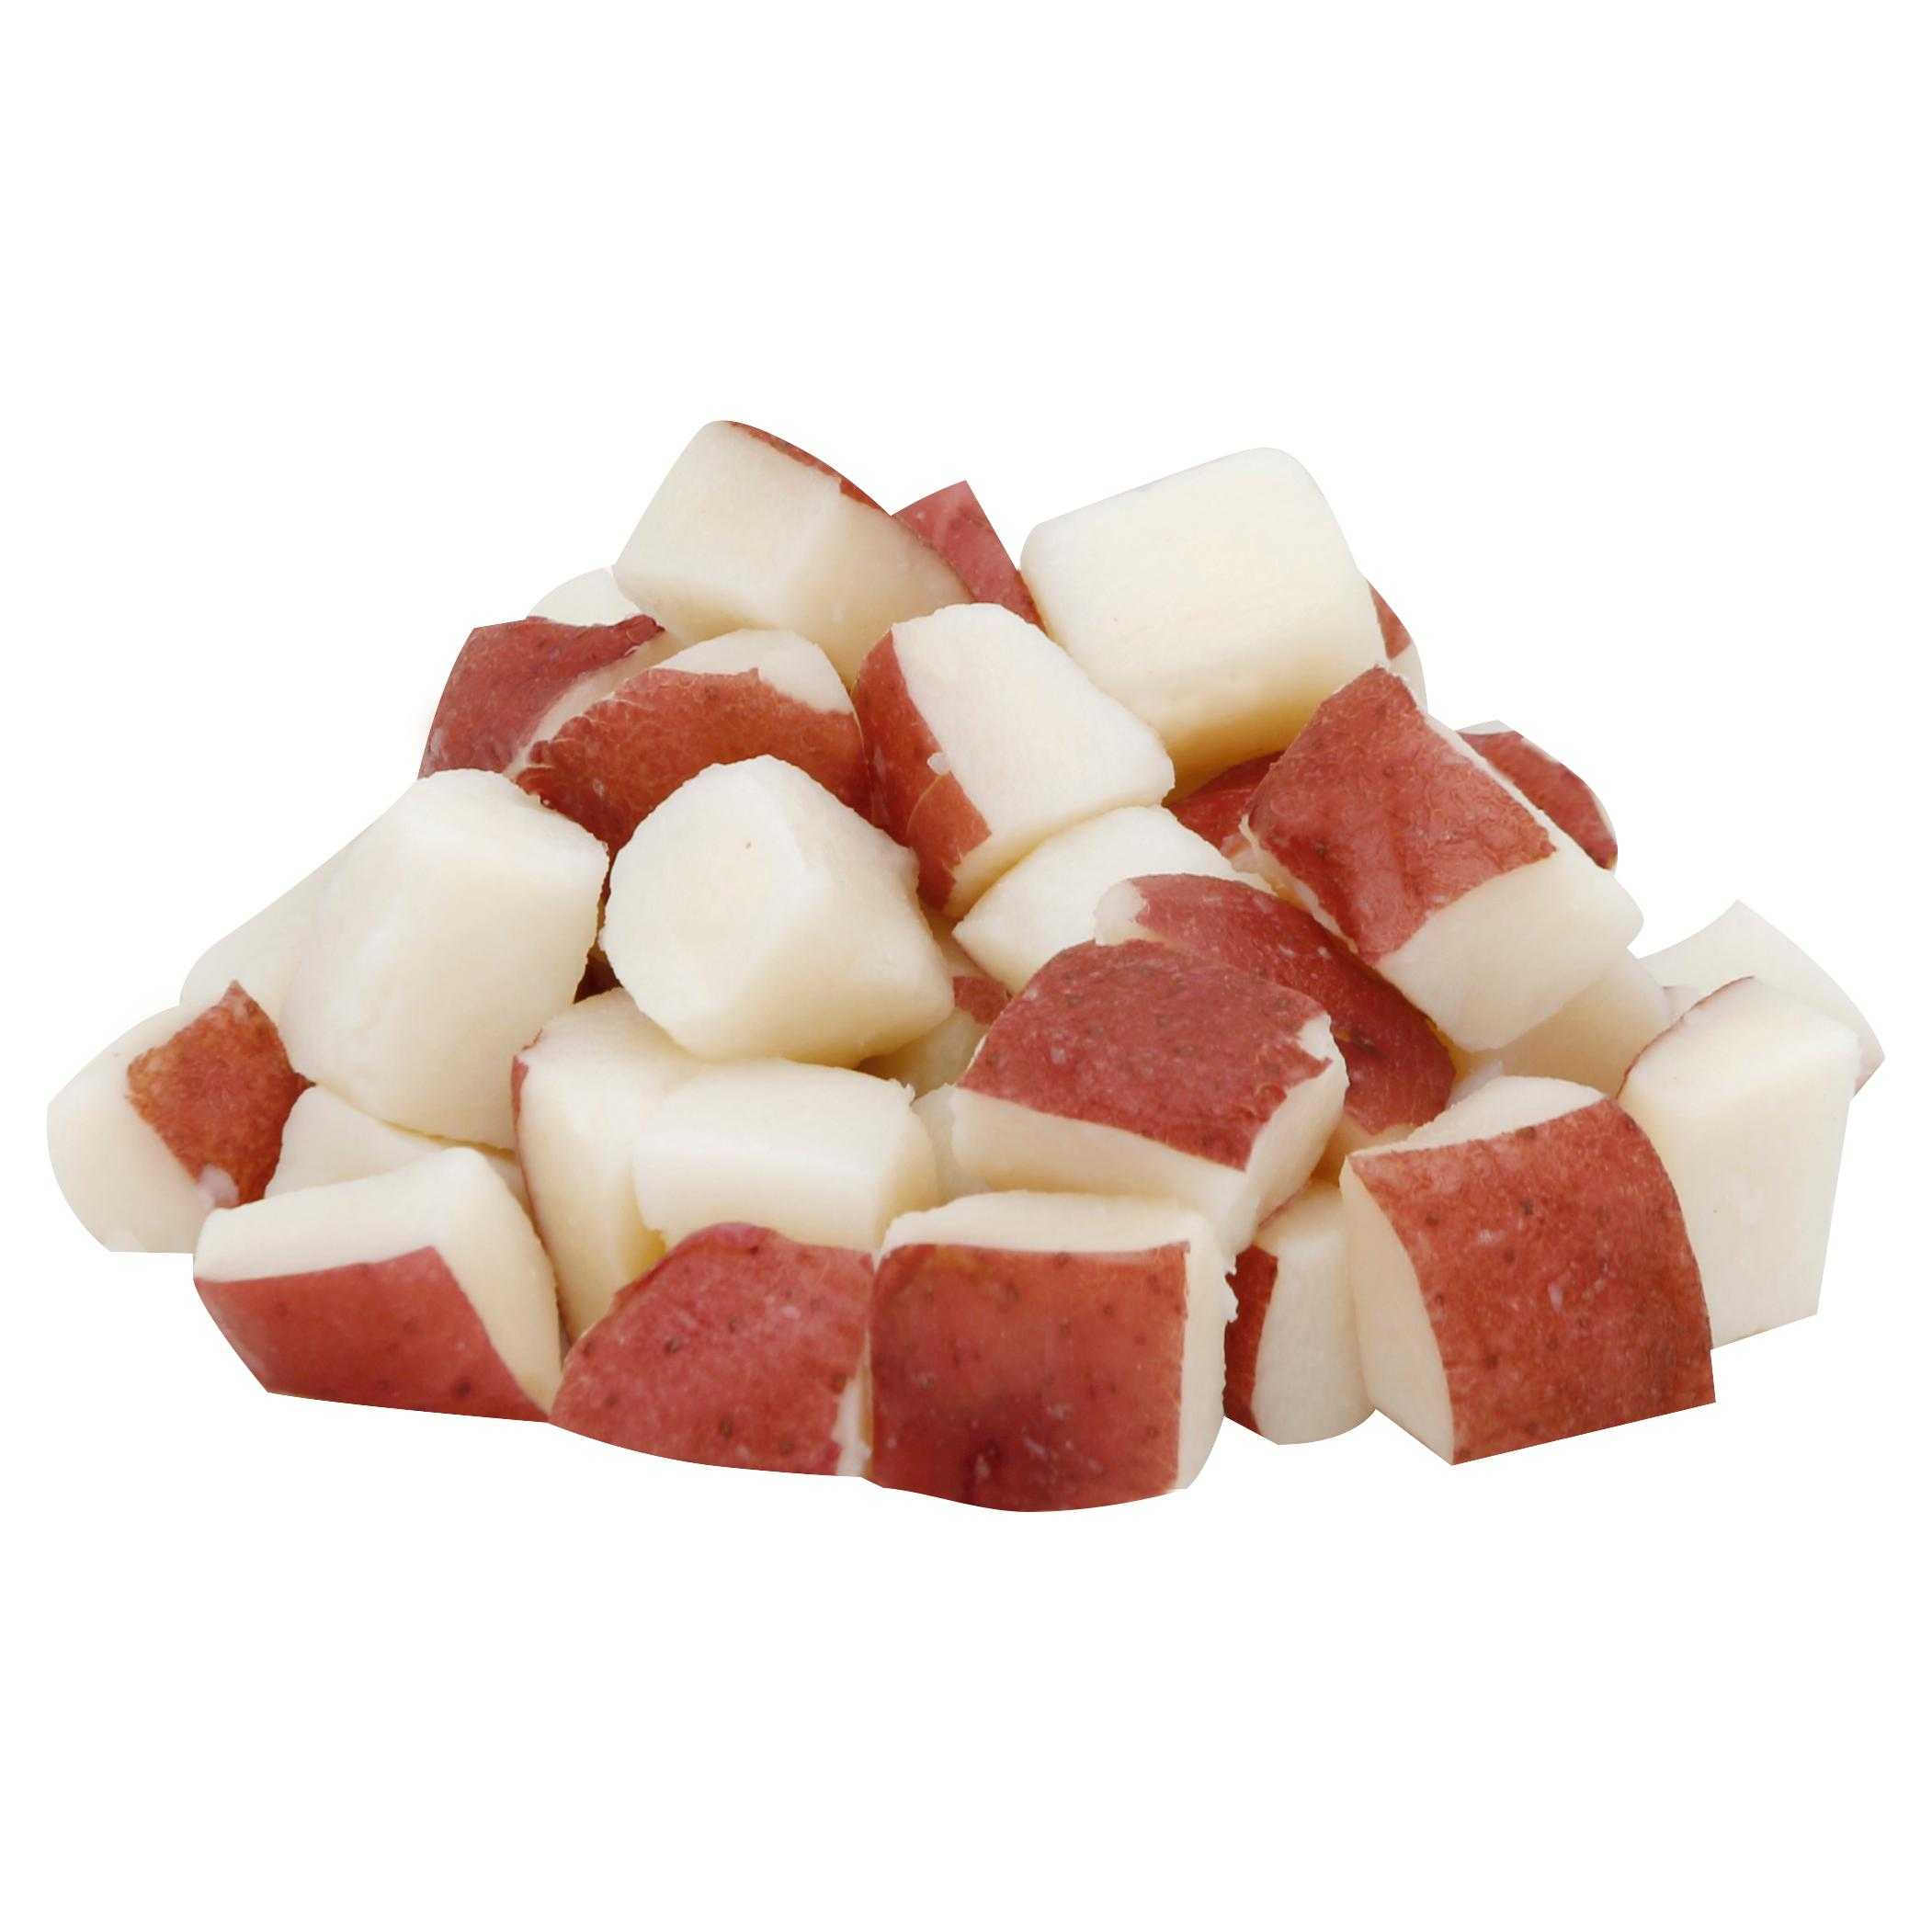 Simply Potatoes® Refrigerated 3/4″ Red Skin Diced Potatoes made with skin-on Red potatoes diced 5/8″ x 3/4″ x 3/4″, 2/10 Lb Bags